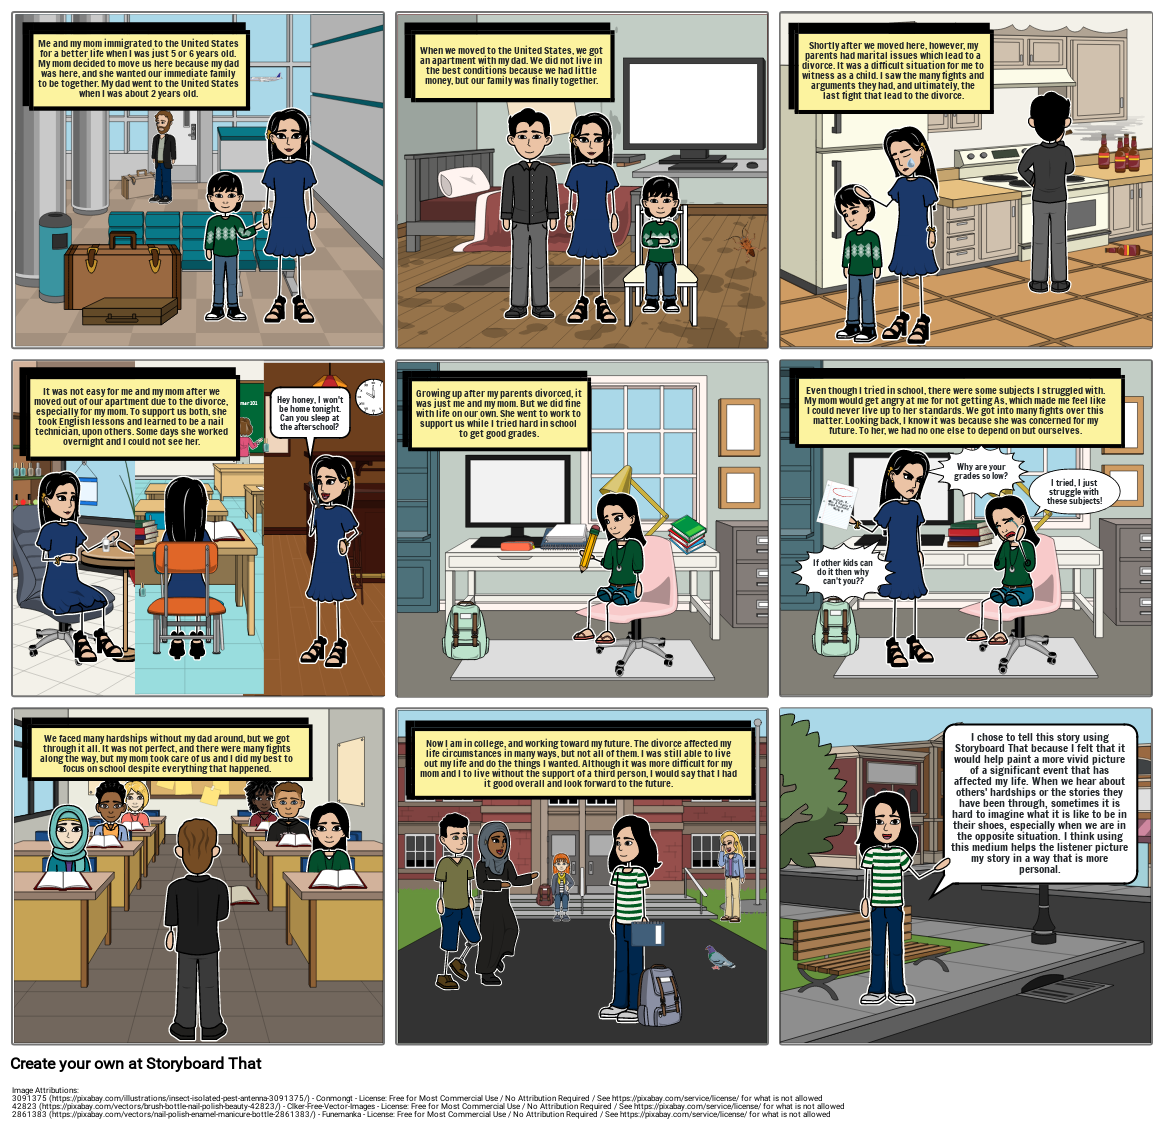 My Story Storyboard by 8d8a8c6a